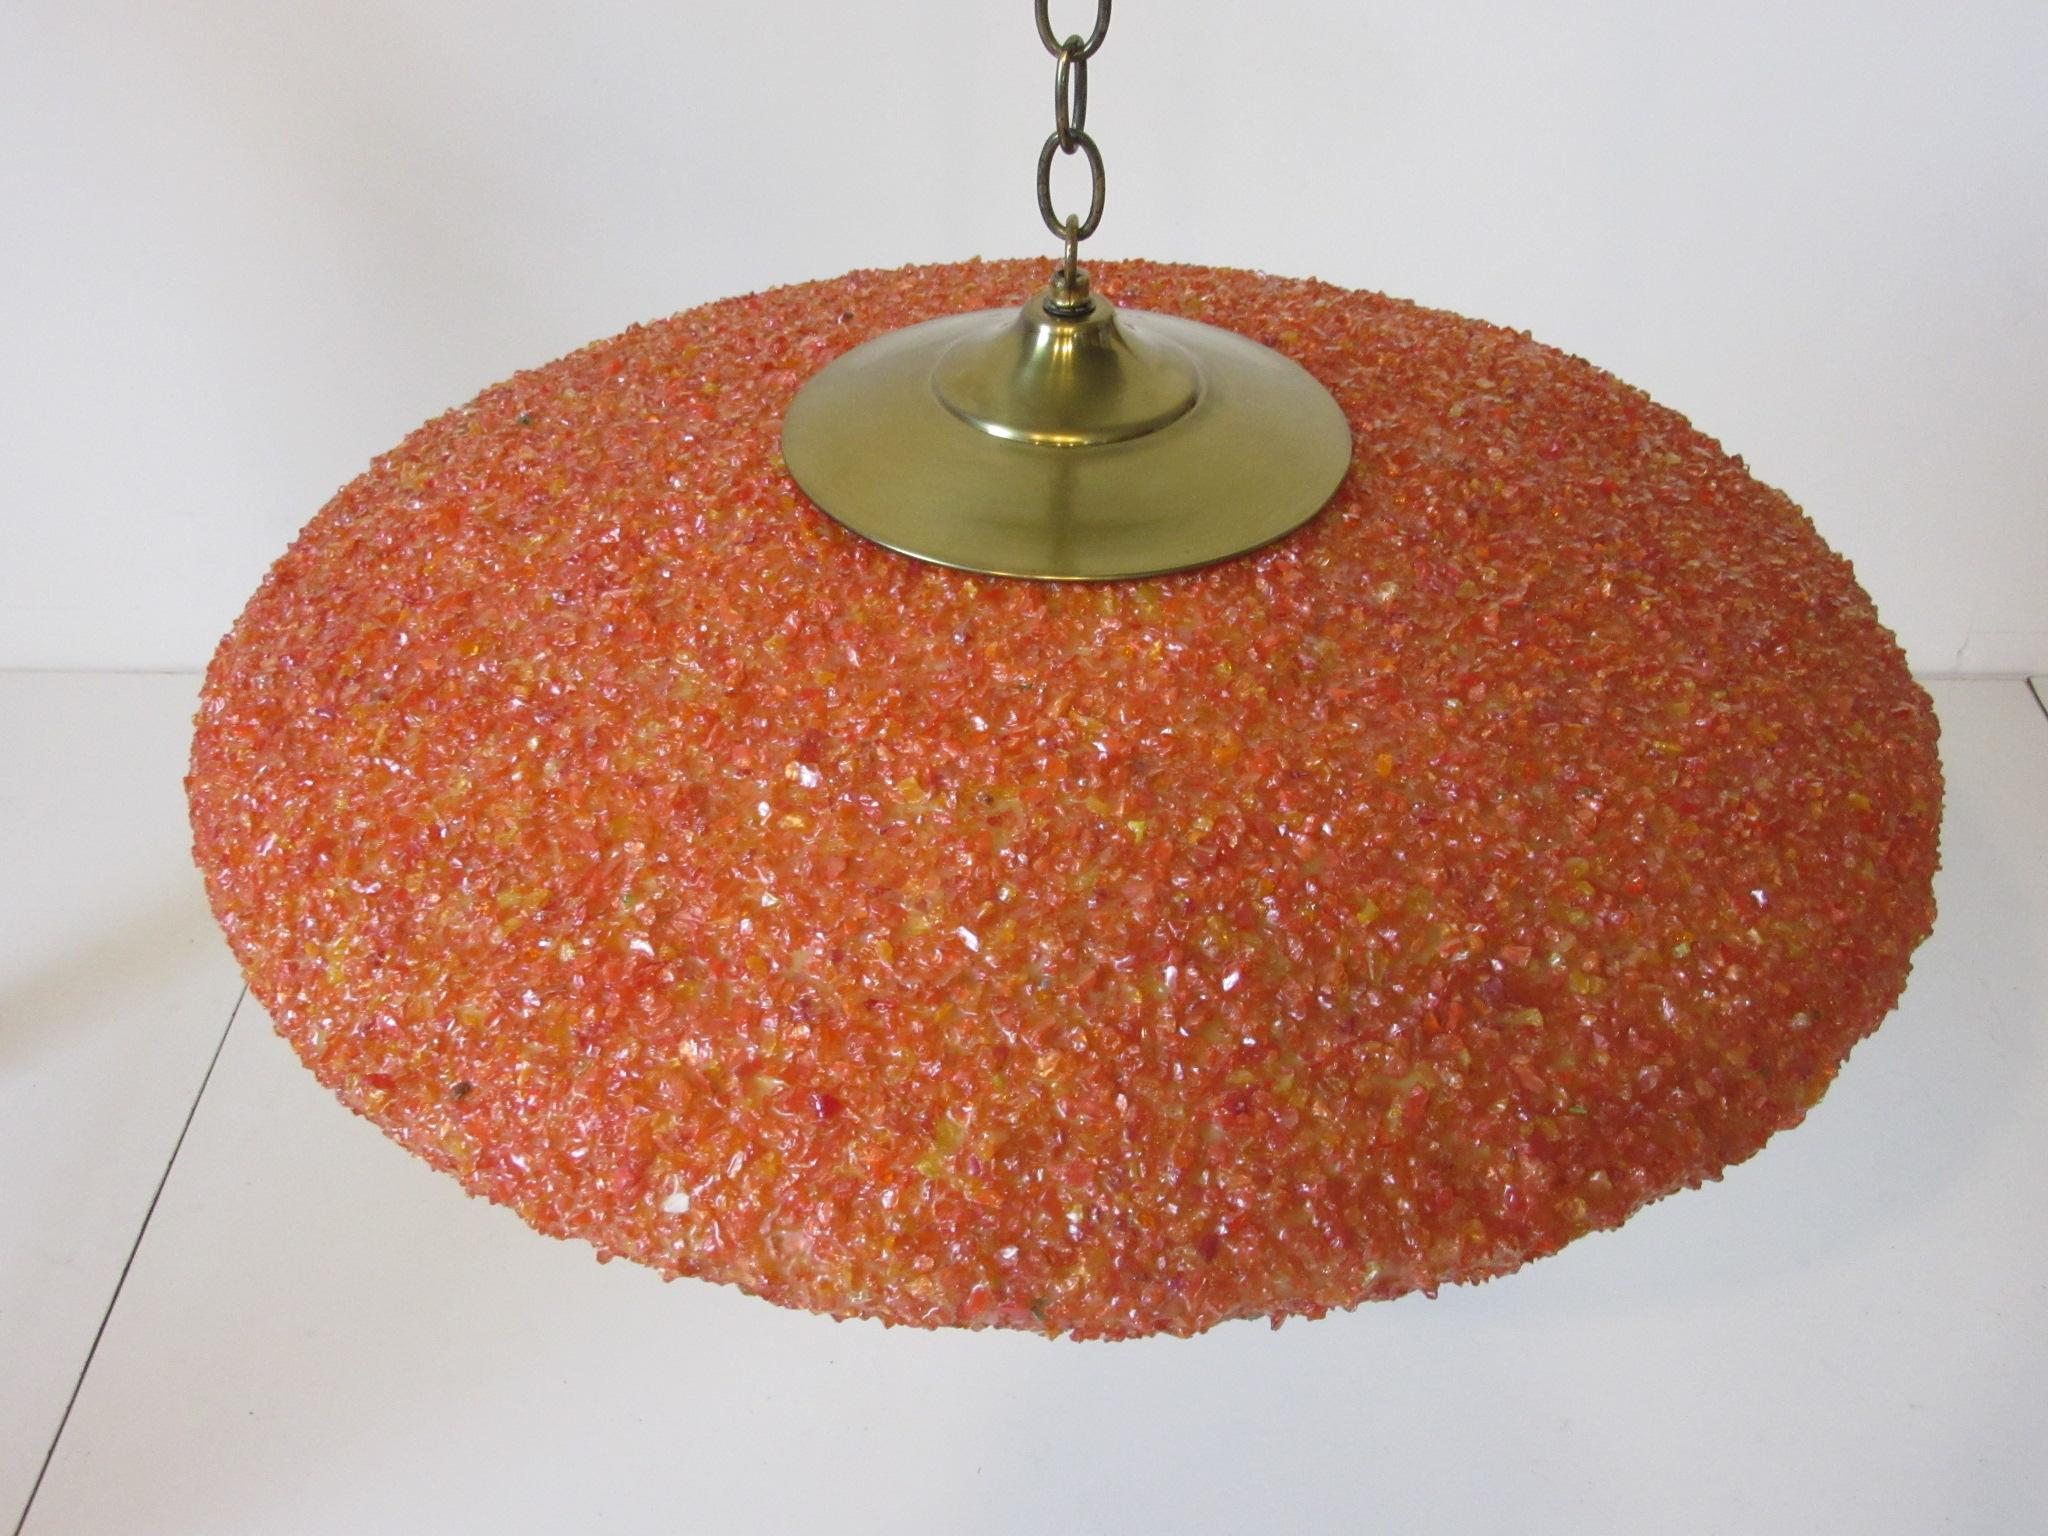 A large Nelson styled hanging flying saucer shaped ceiling light with orange and reddish toned small chunks of resin mounted to a fiberglass form with brass mounting plates and chain. Retains the manufactures tag from the Geringer Lighting Company.